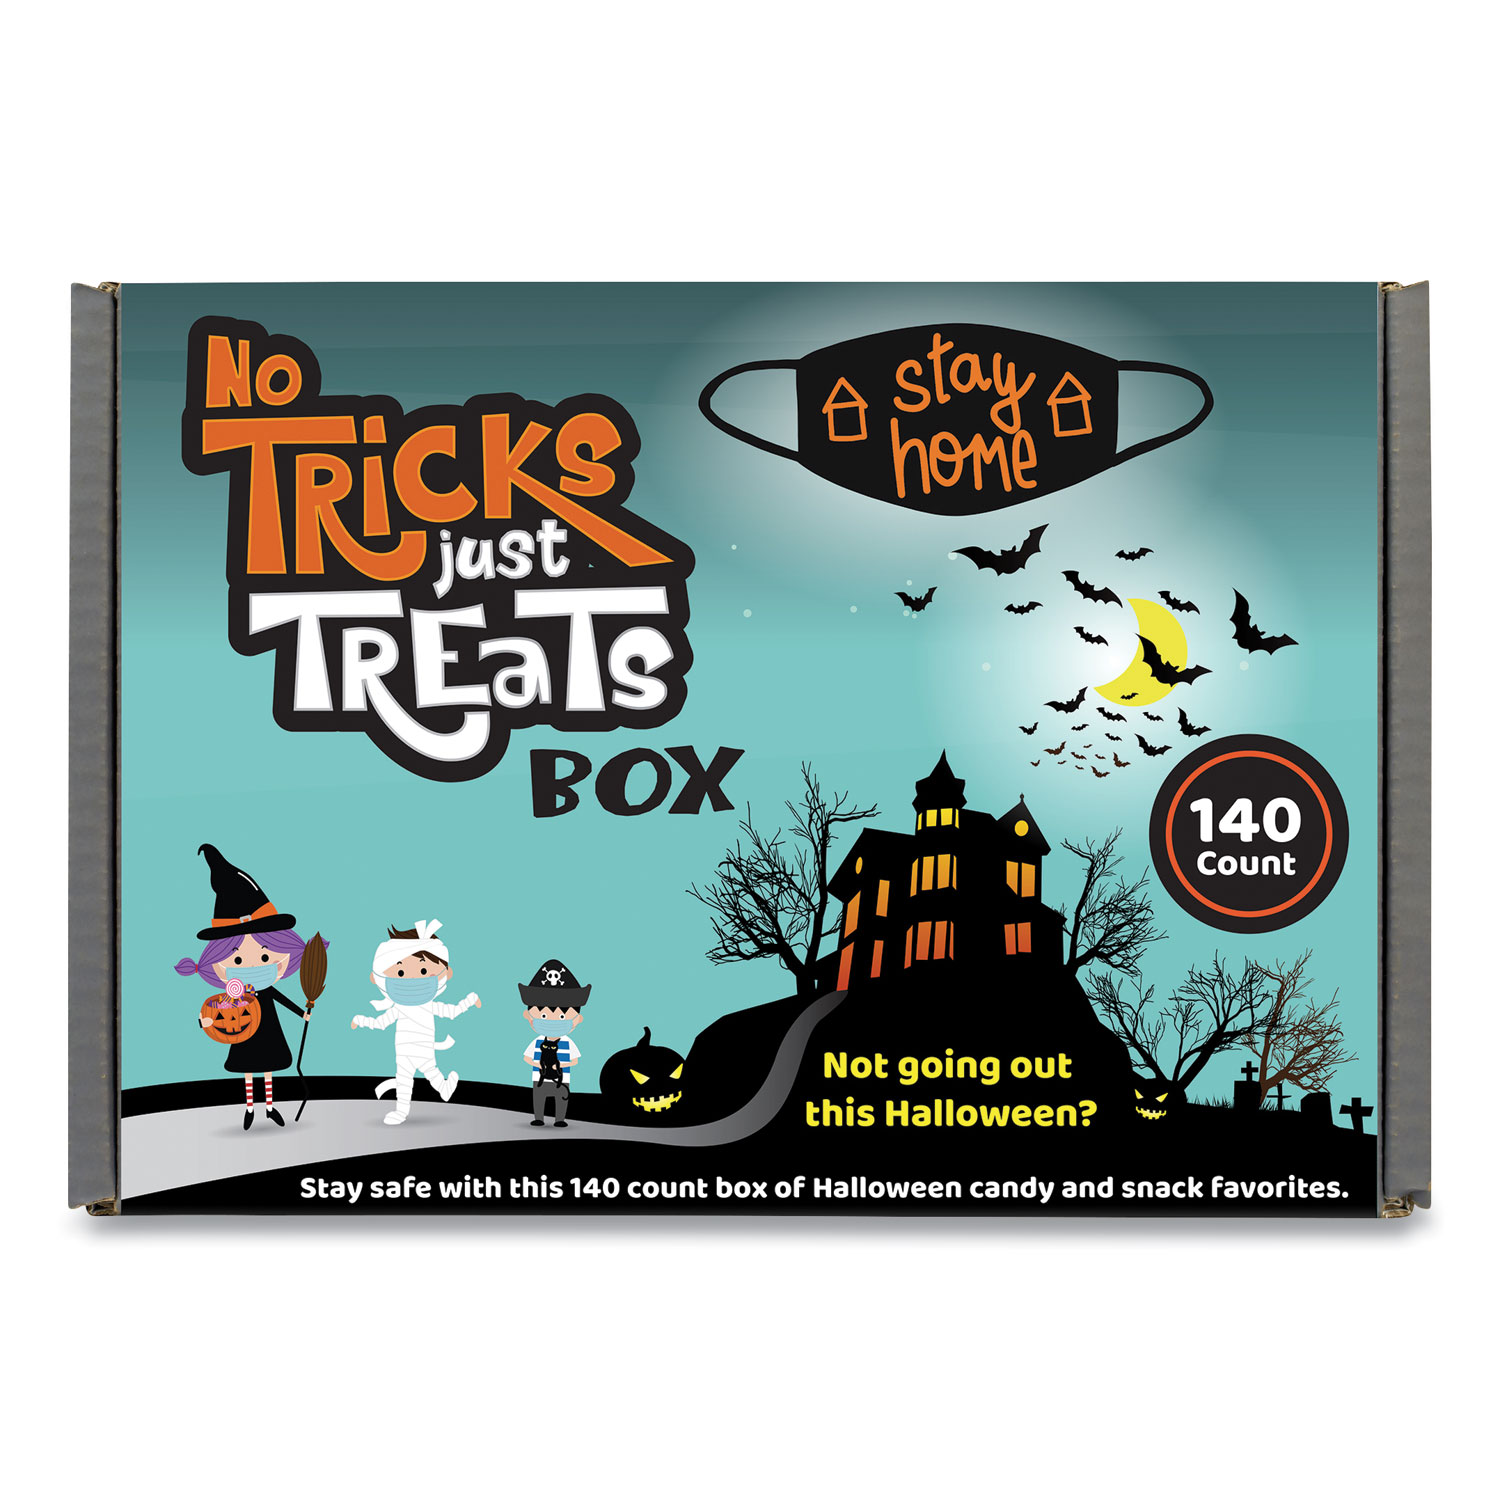  Snack Box Pros 700-00084 No Tricks Just Treats Halloween Box, Assorted Varieties, 6 lb Box, Free Delivery in 1-4 Business Days (GRR70000084) 